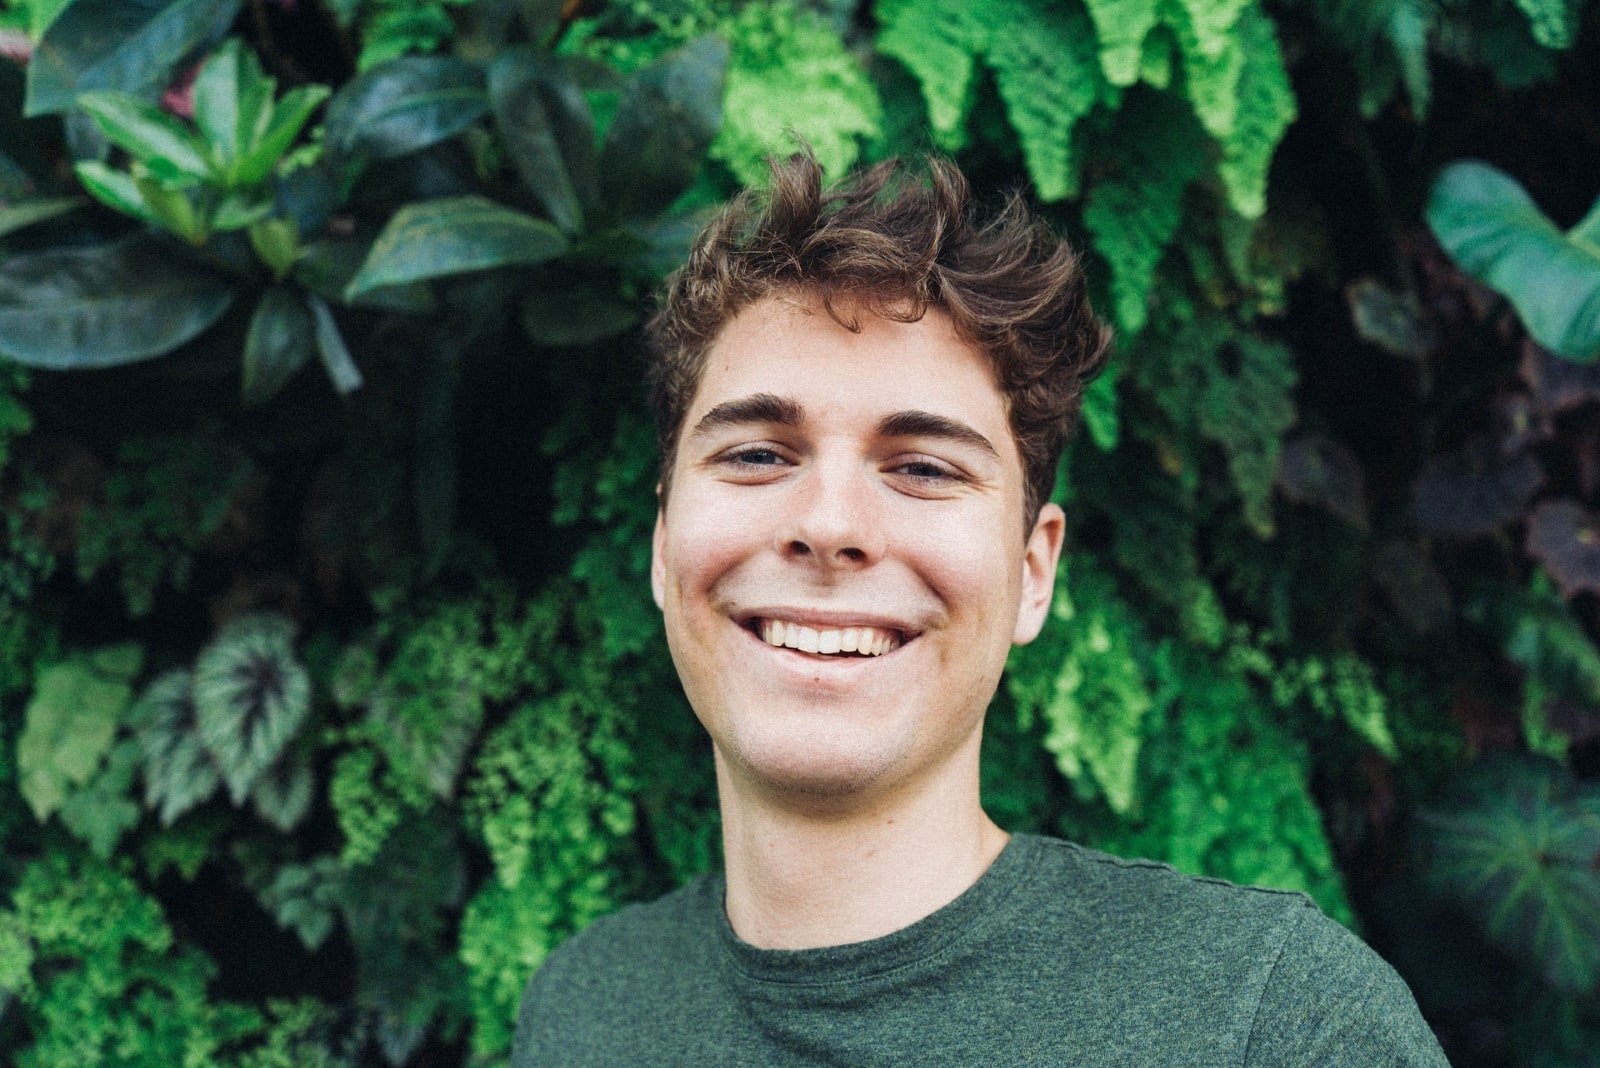 man smiling while standing near plants